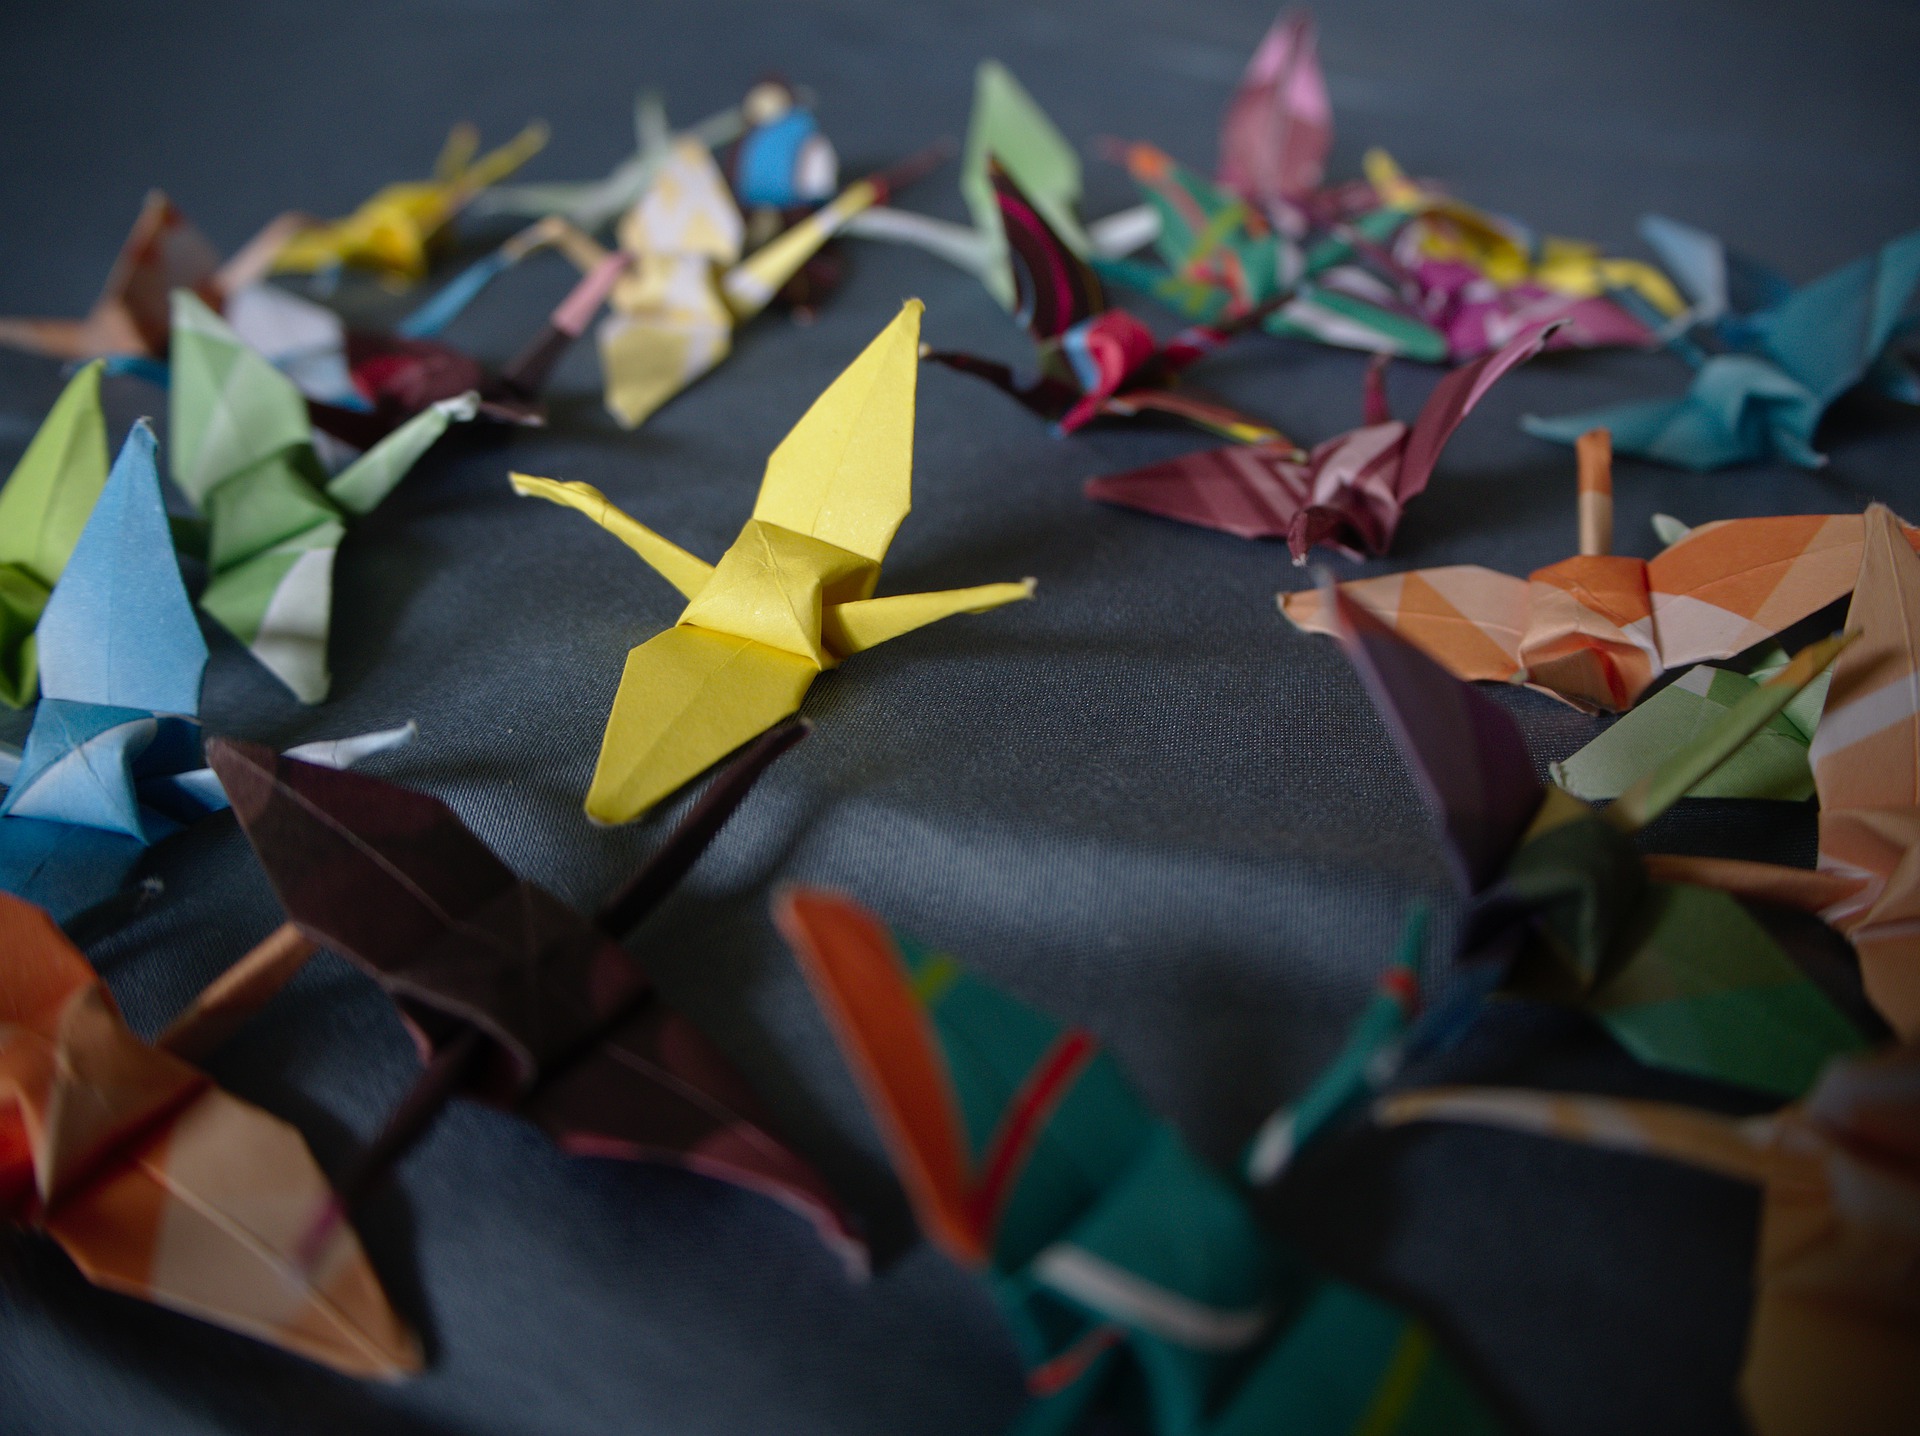 A collection of birds made by folding small pieces of paper.